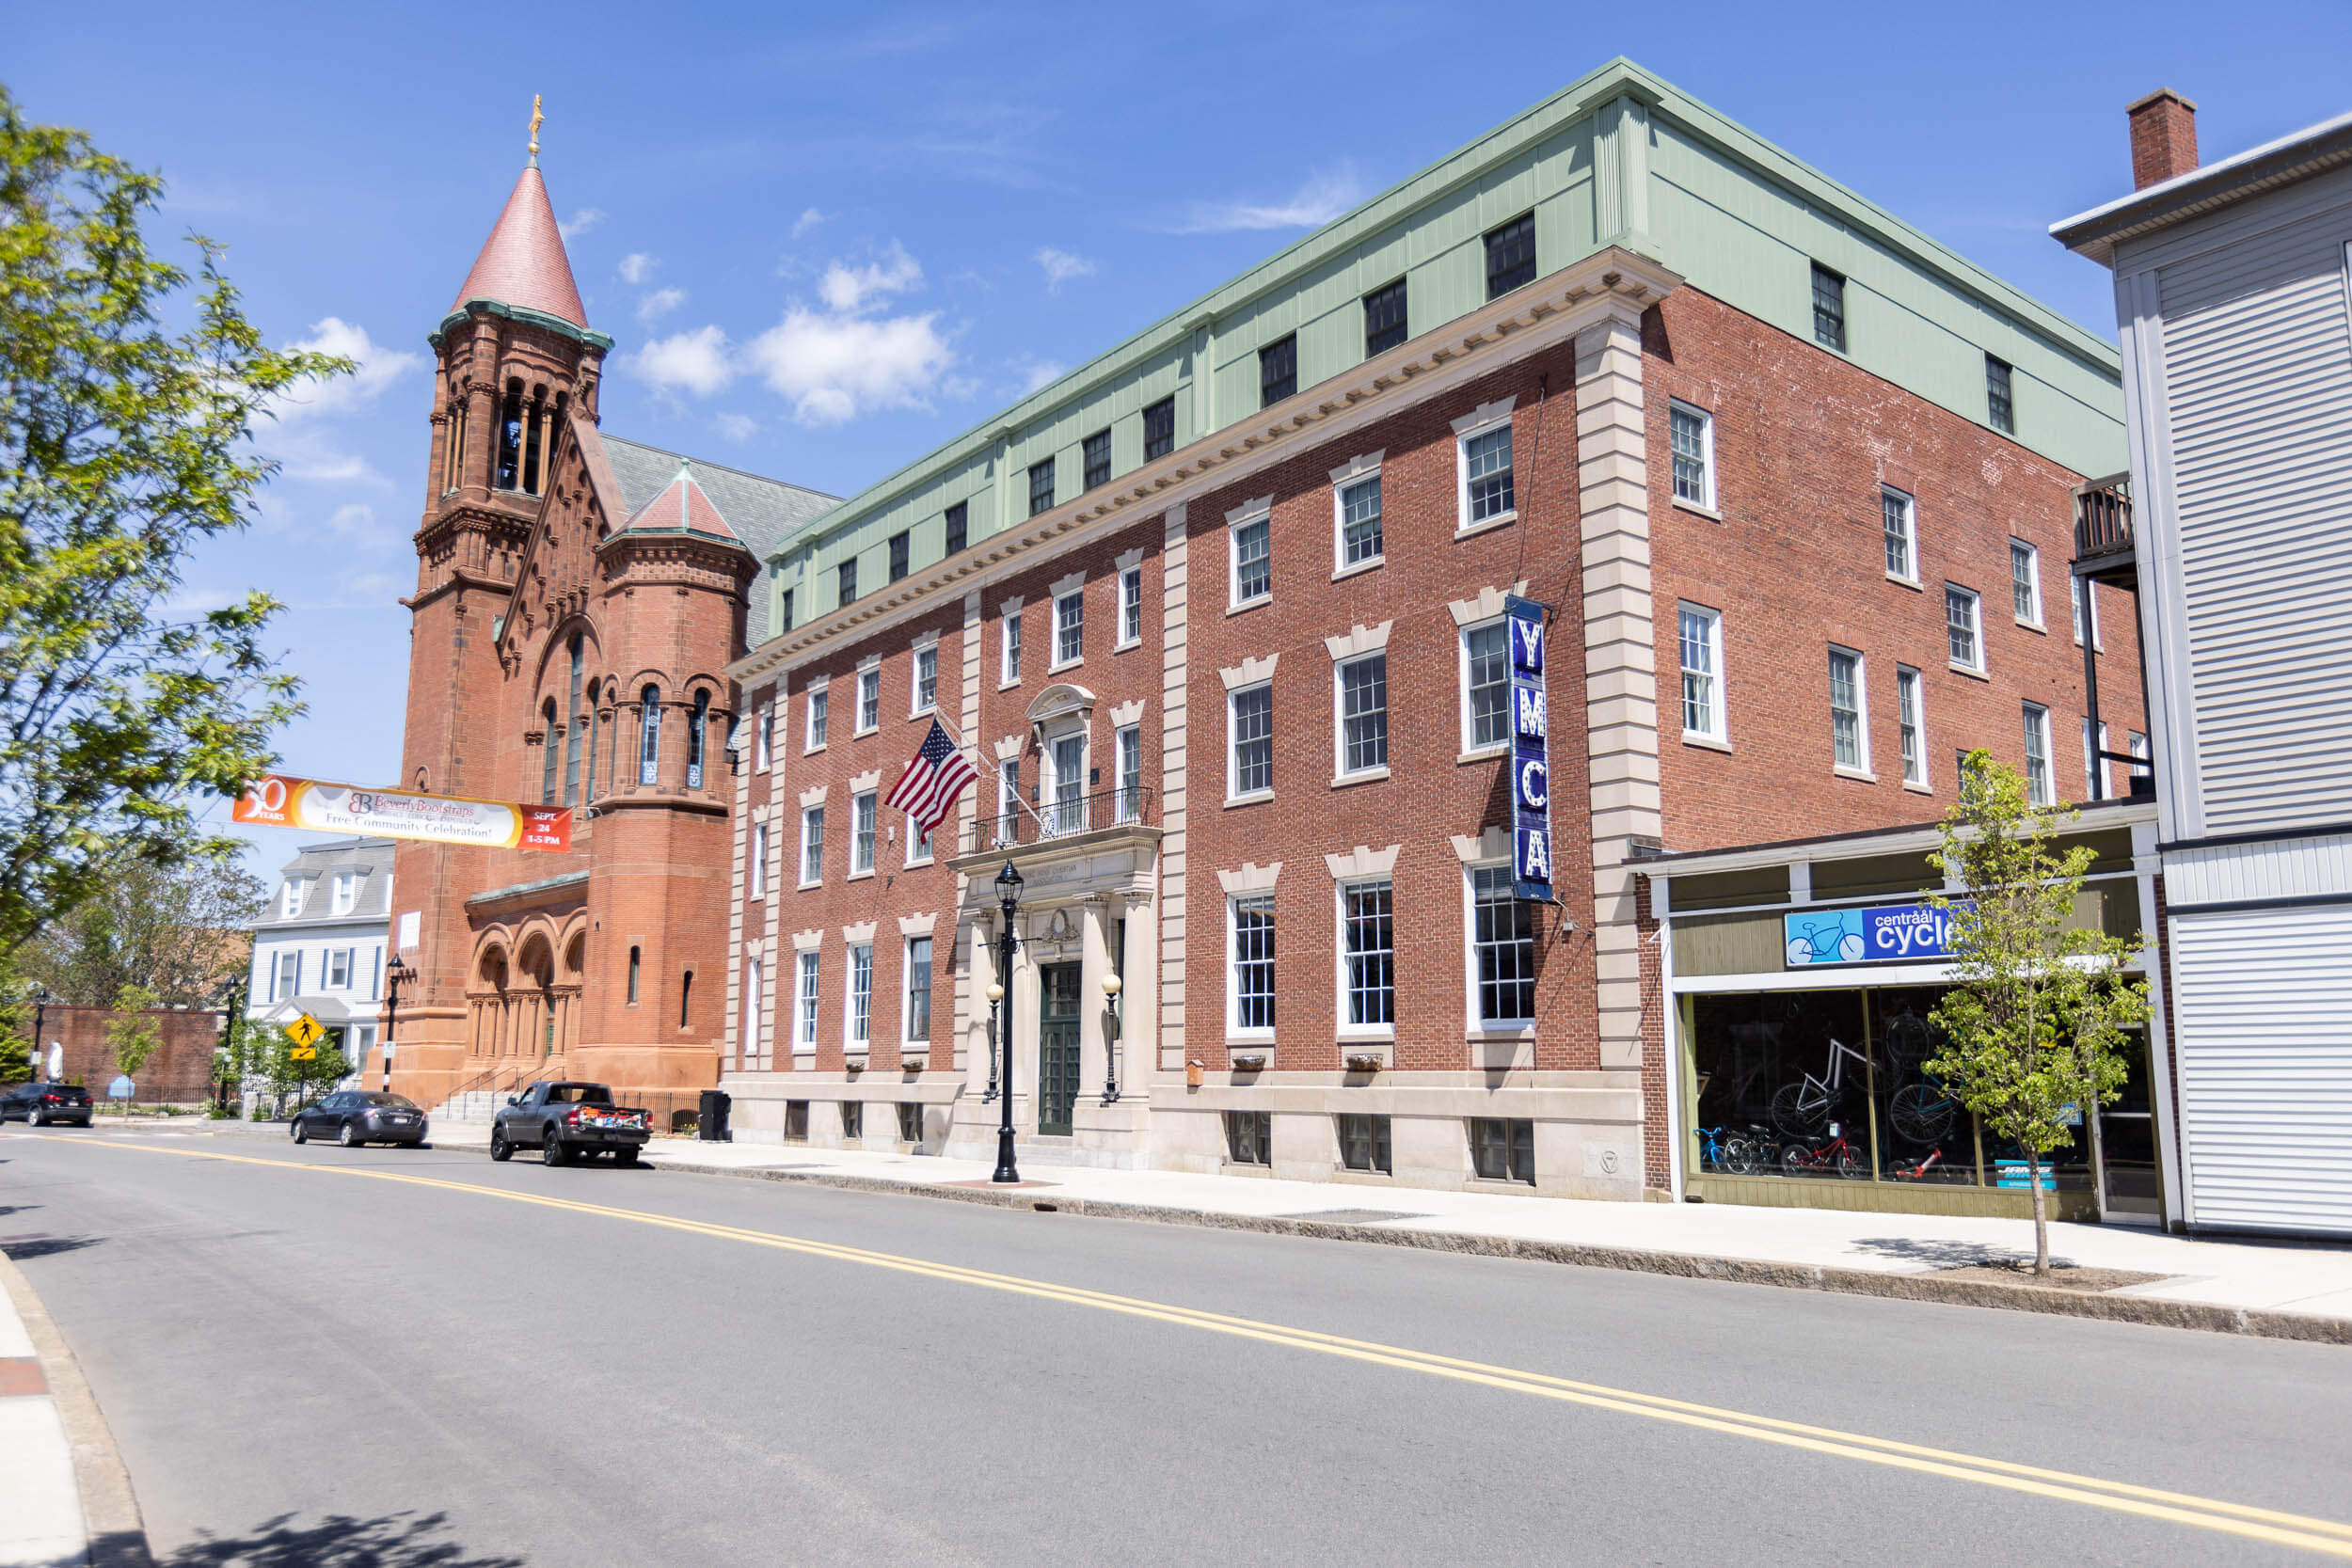 Windover Construction completes renovation and expansion of Cabot St. YMCA Housing, Beverly, MA